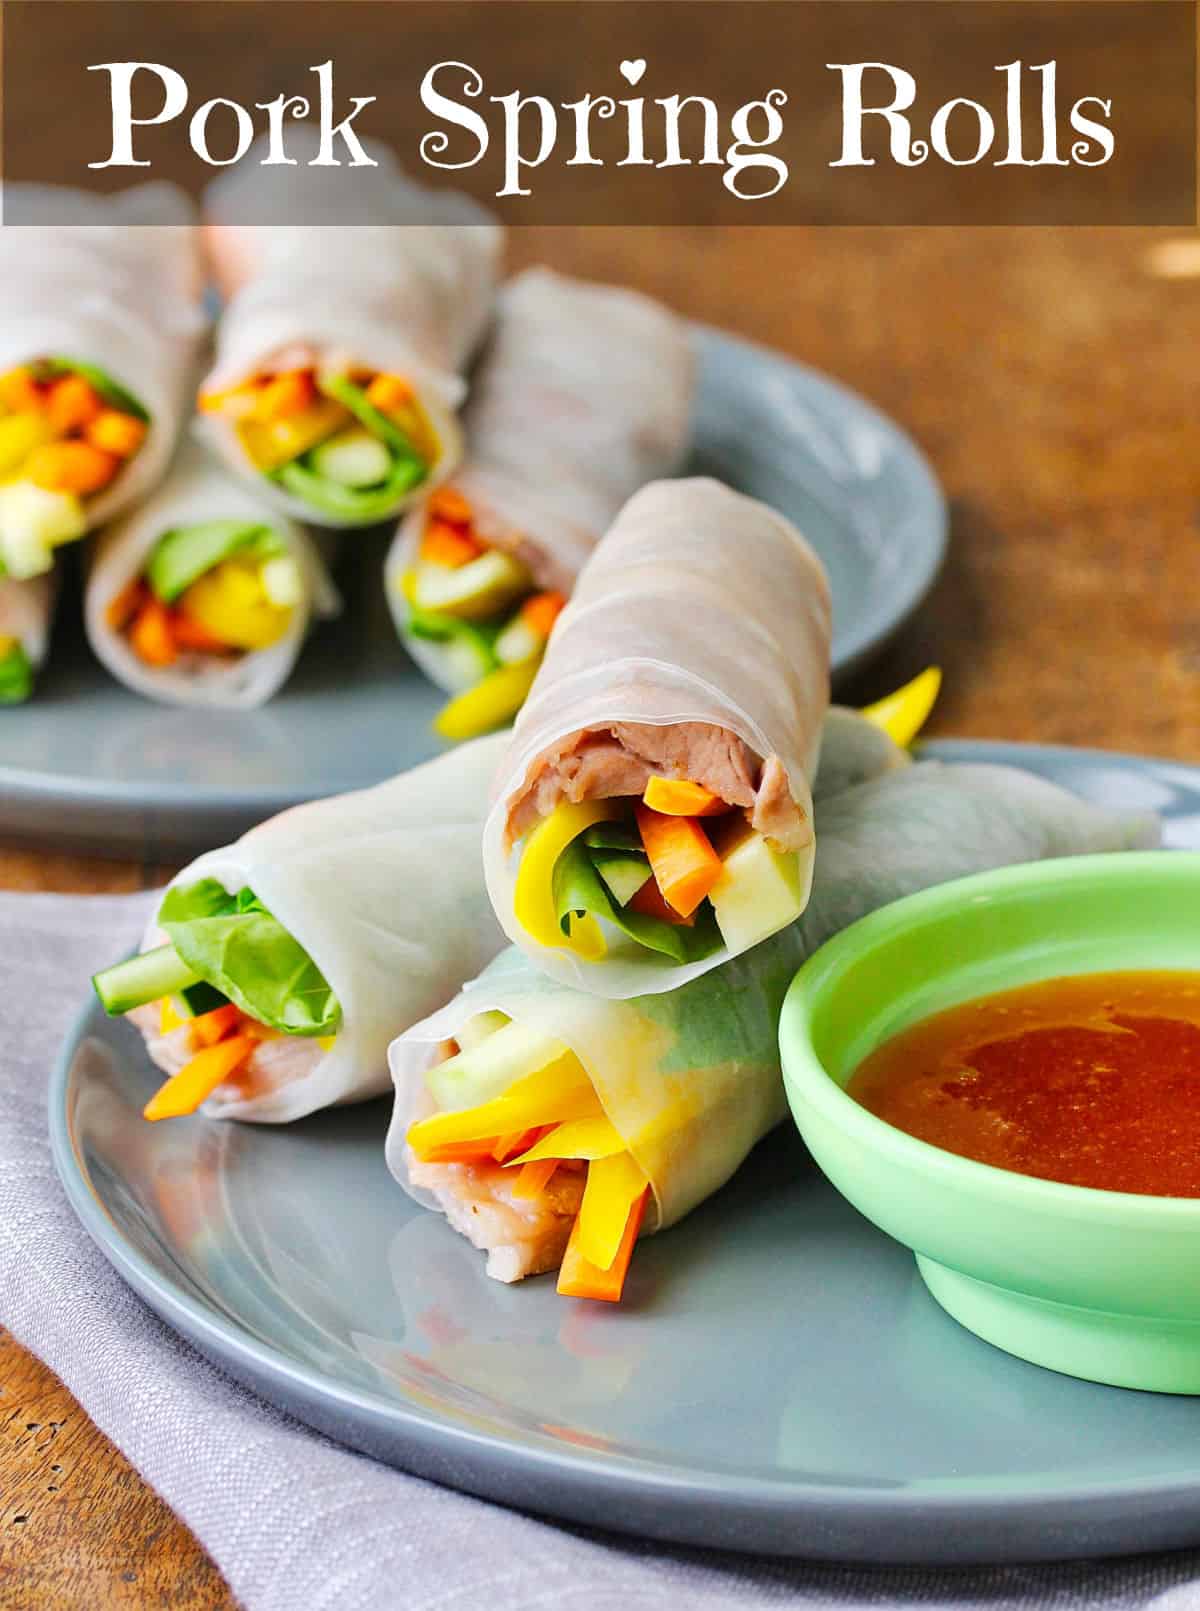 Pork Spring Rolls with Spicy Plum Dipping Sauce on gray plates.